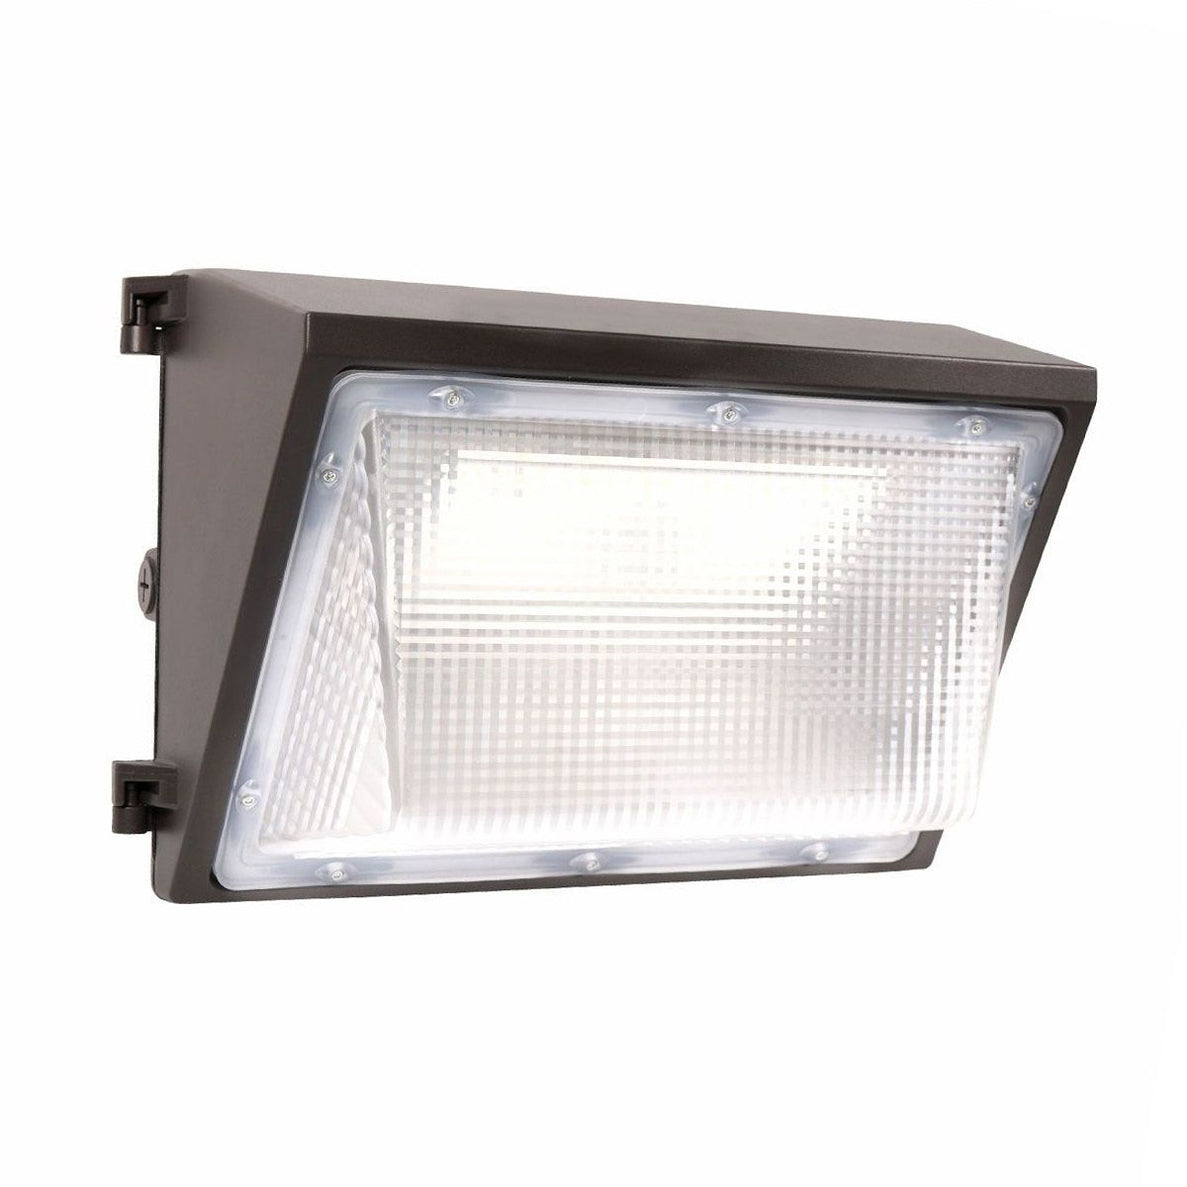 WPS-100WE 100W Selectable Semi-Cutoff LED Wall Pack with Emergency Battery